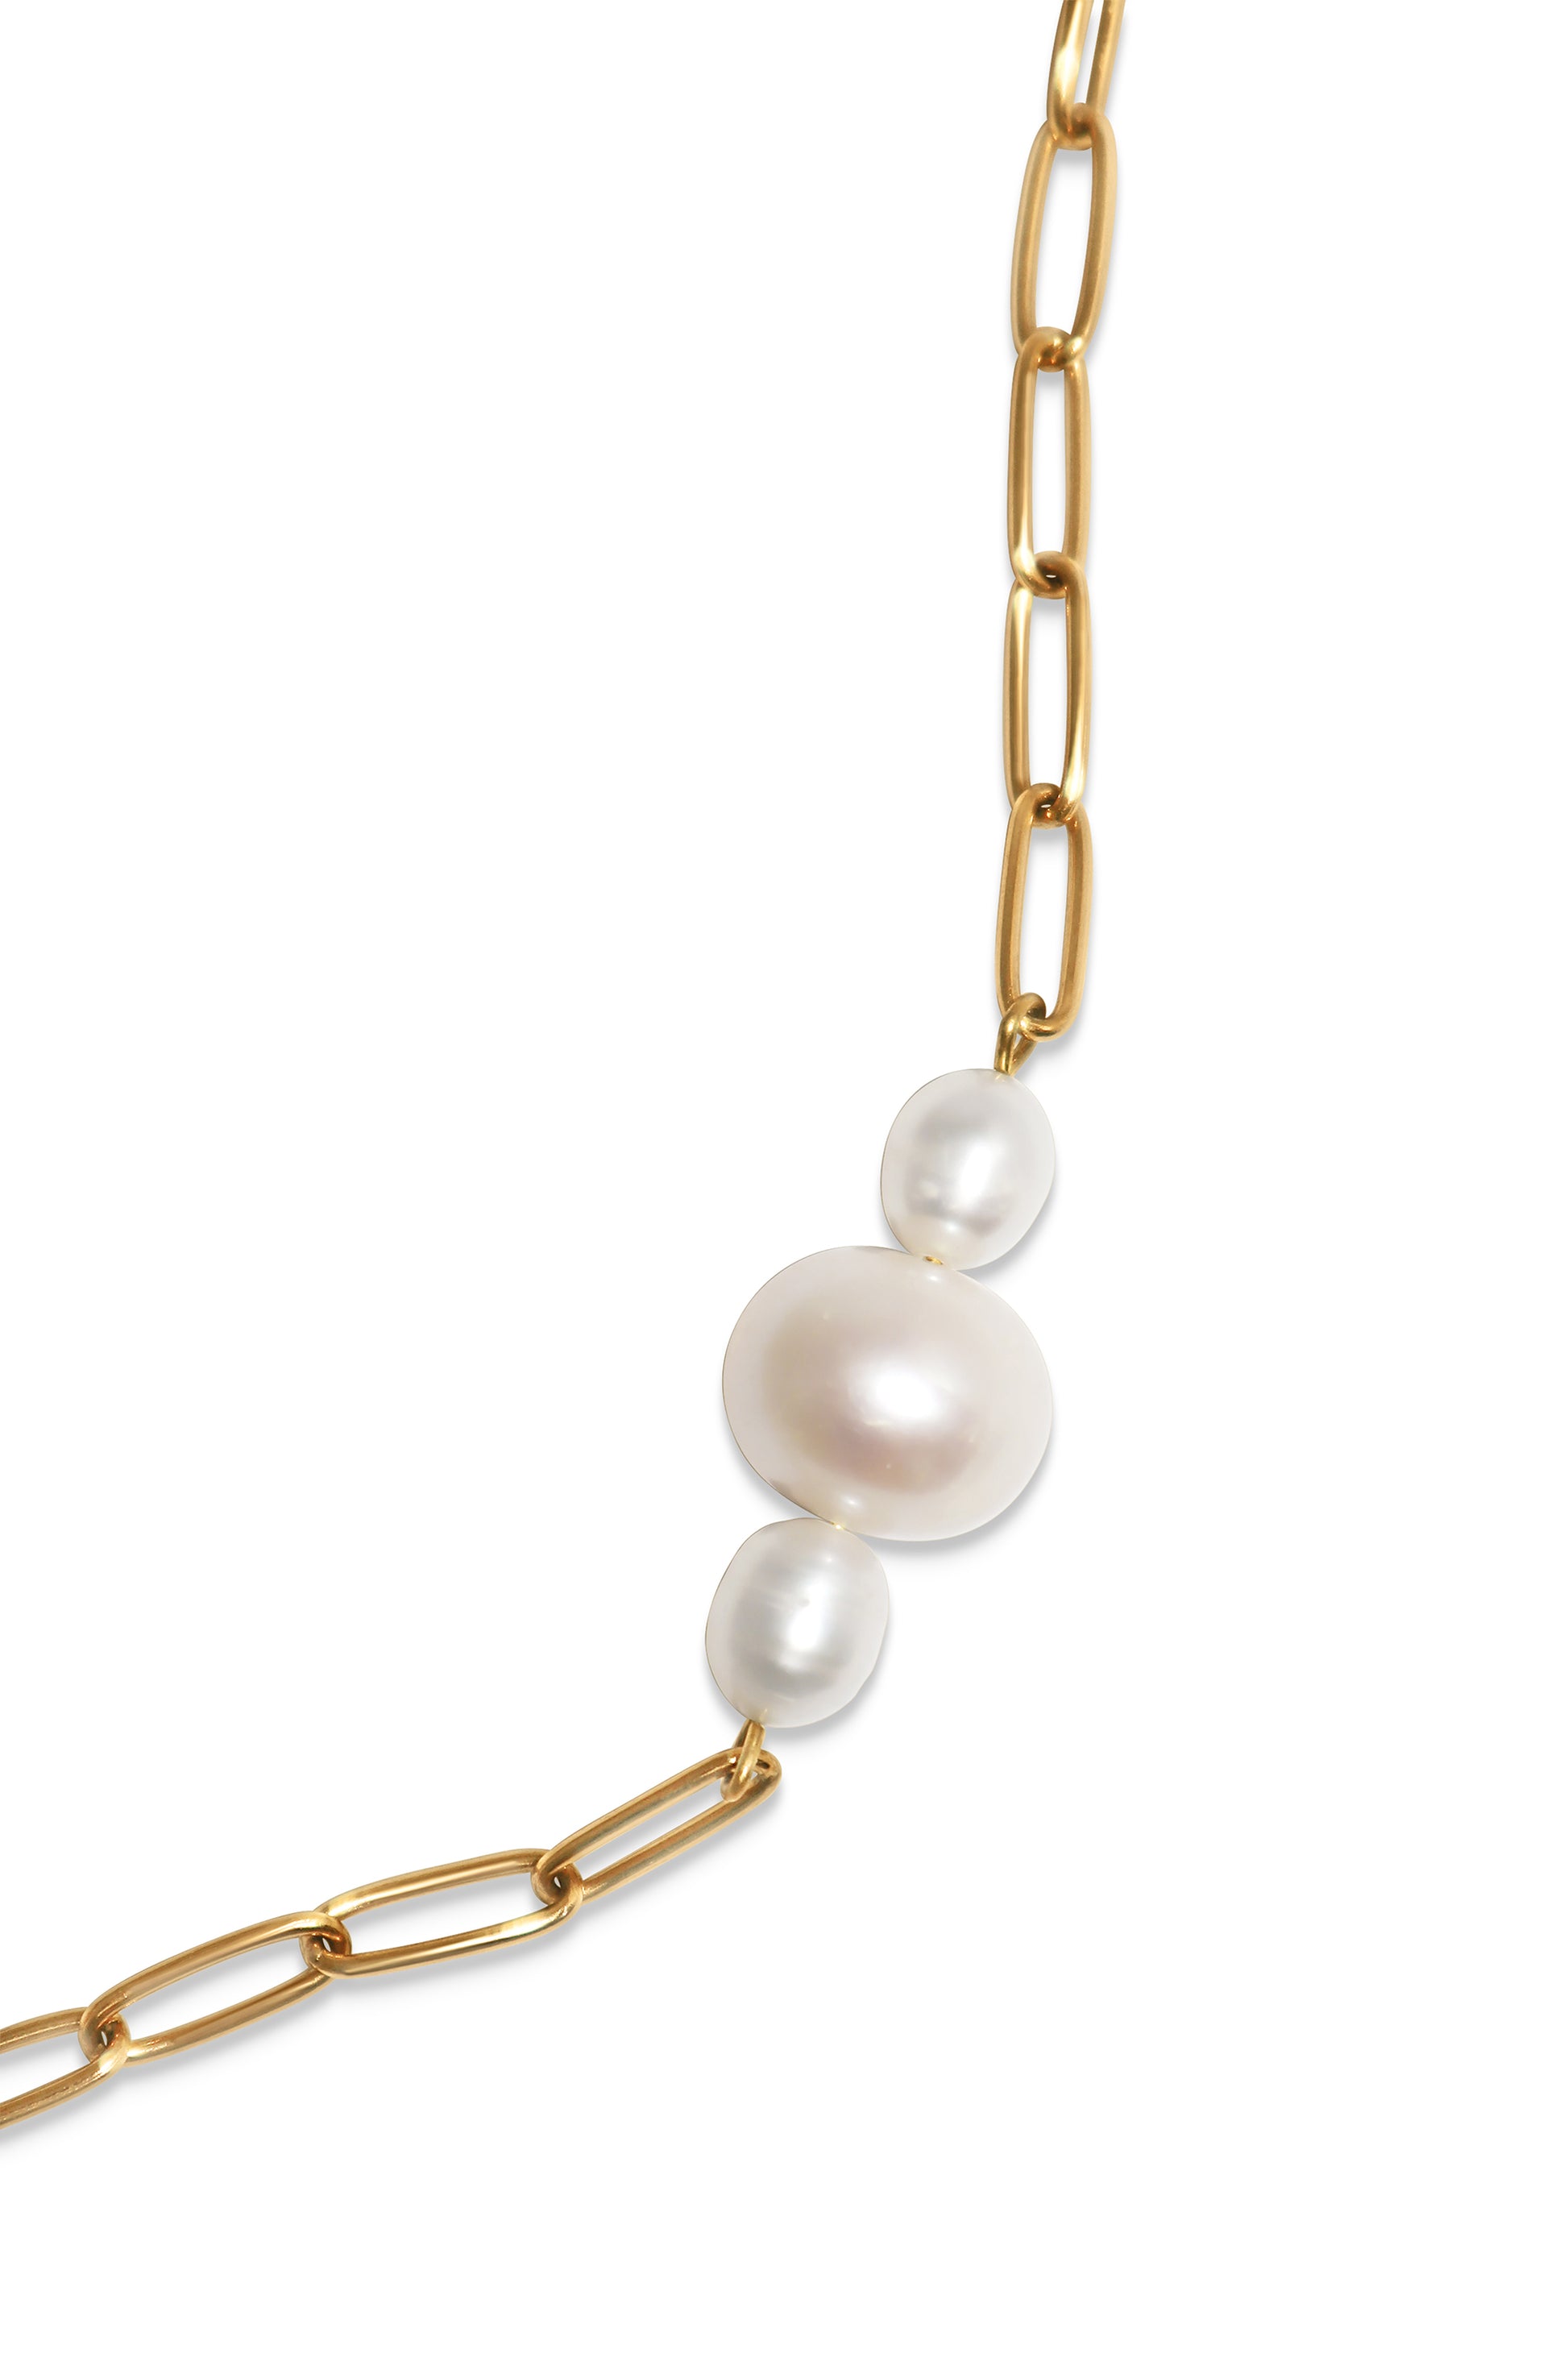 necklace is made from elongated gold-tone chain links strung with river pearls